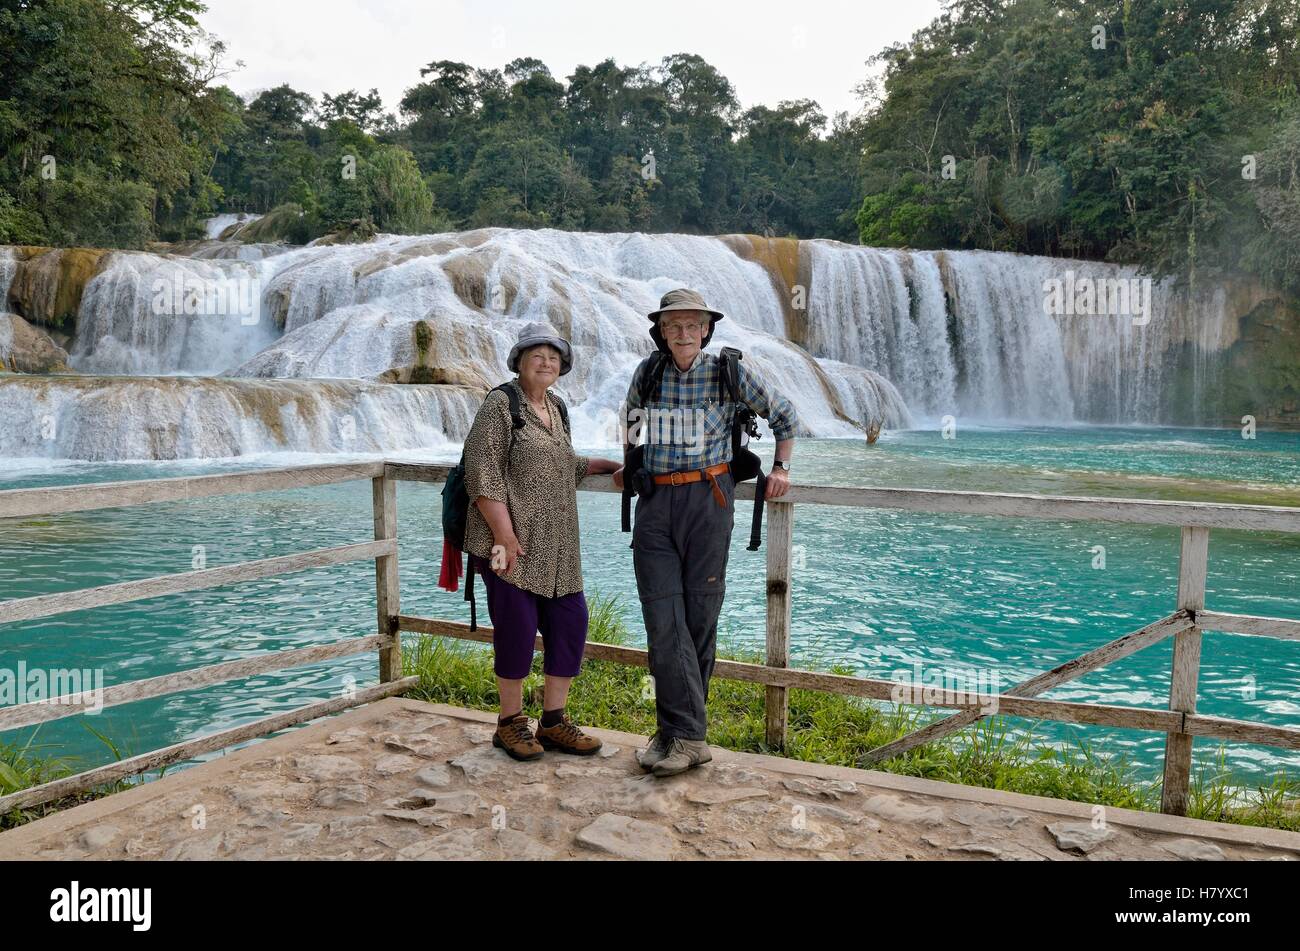 Tourists are standing at the Agua Azul blue water waterfalls, Palenque, Chiapas, Mexico Stock Photo